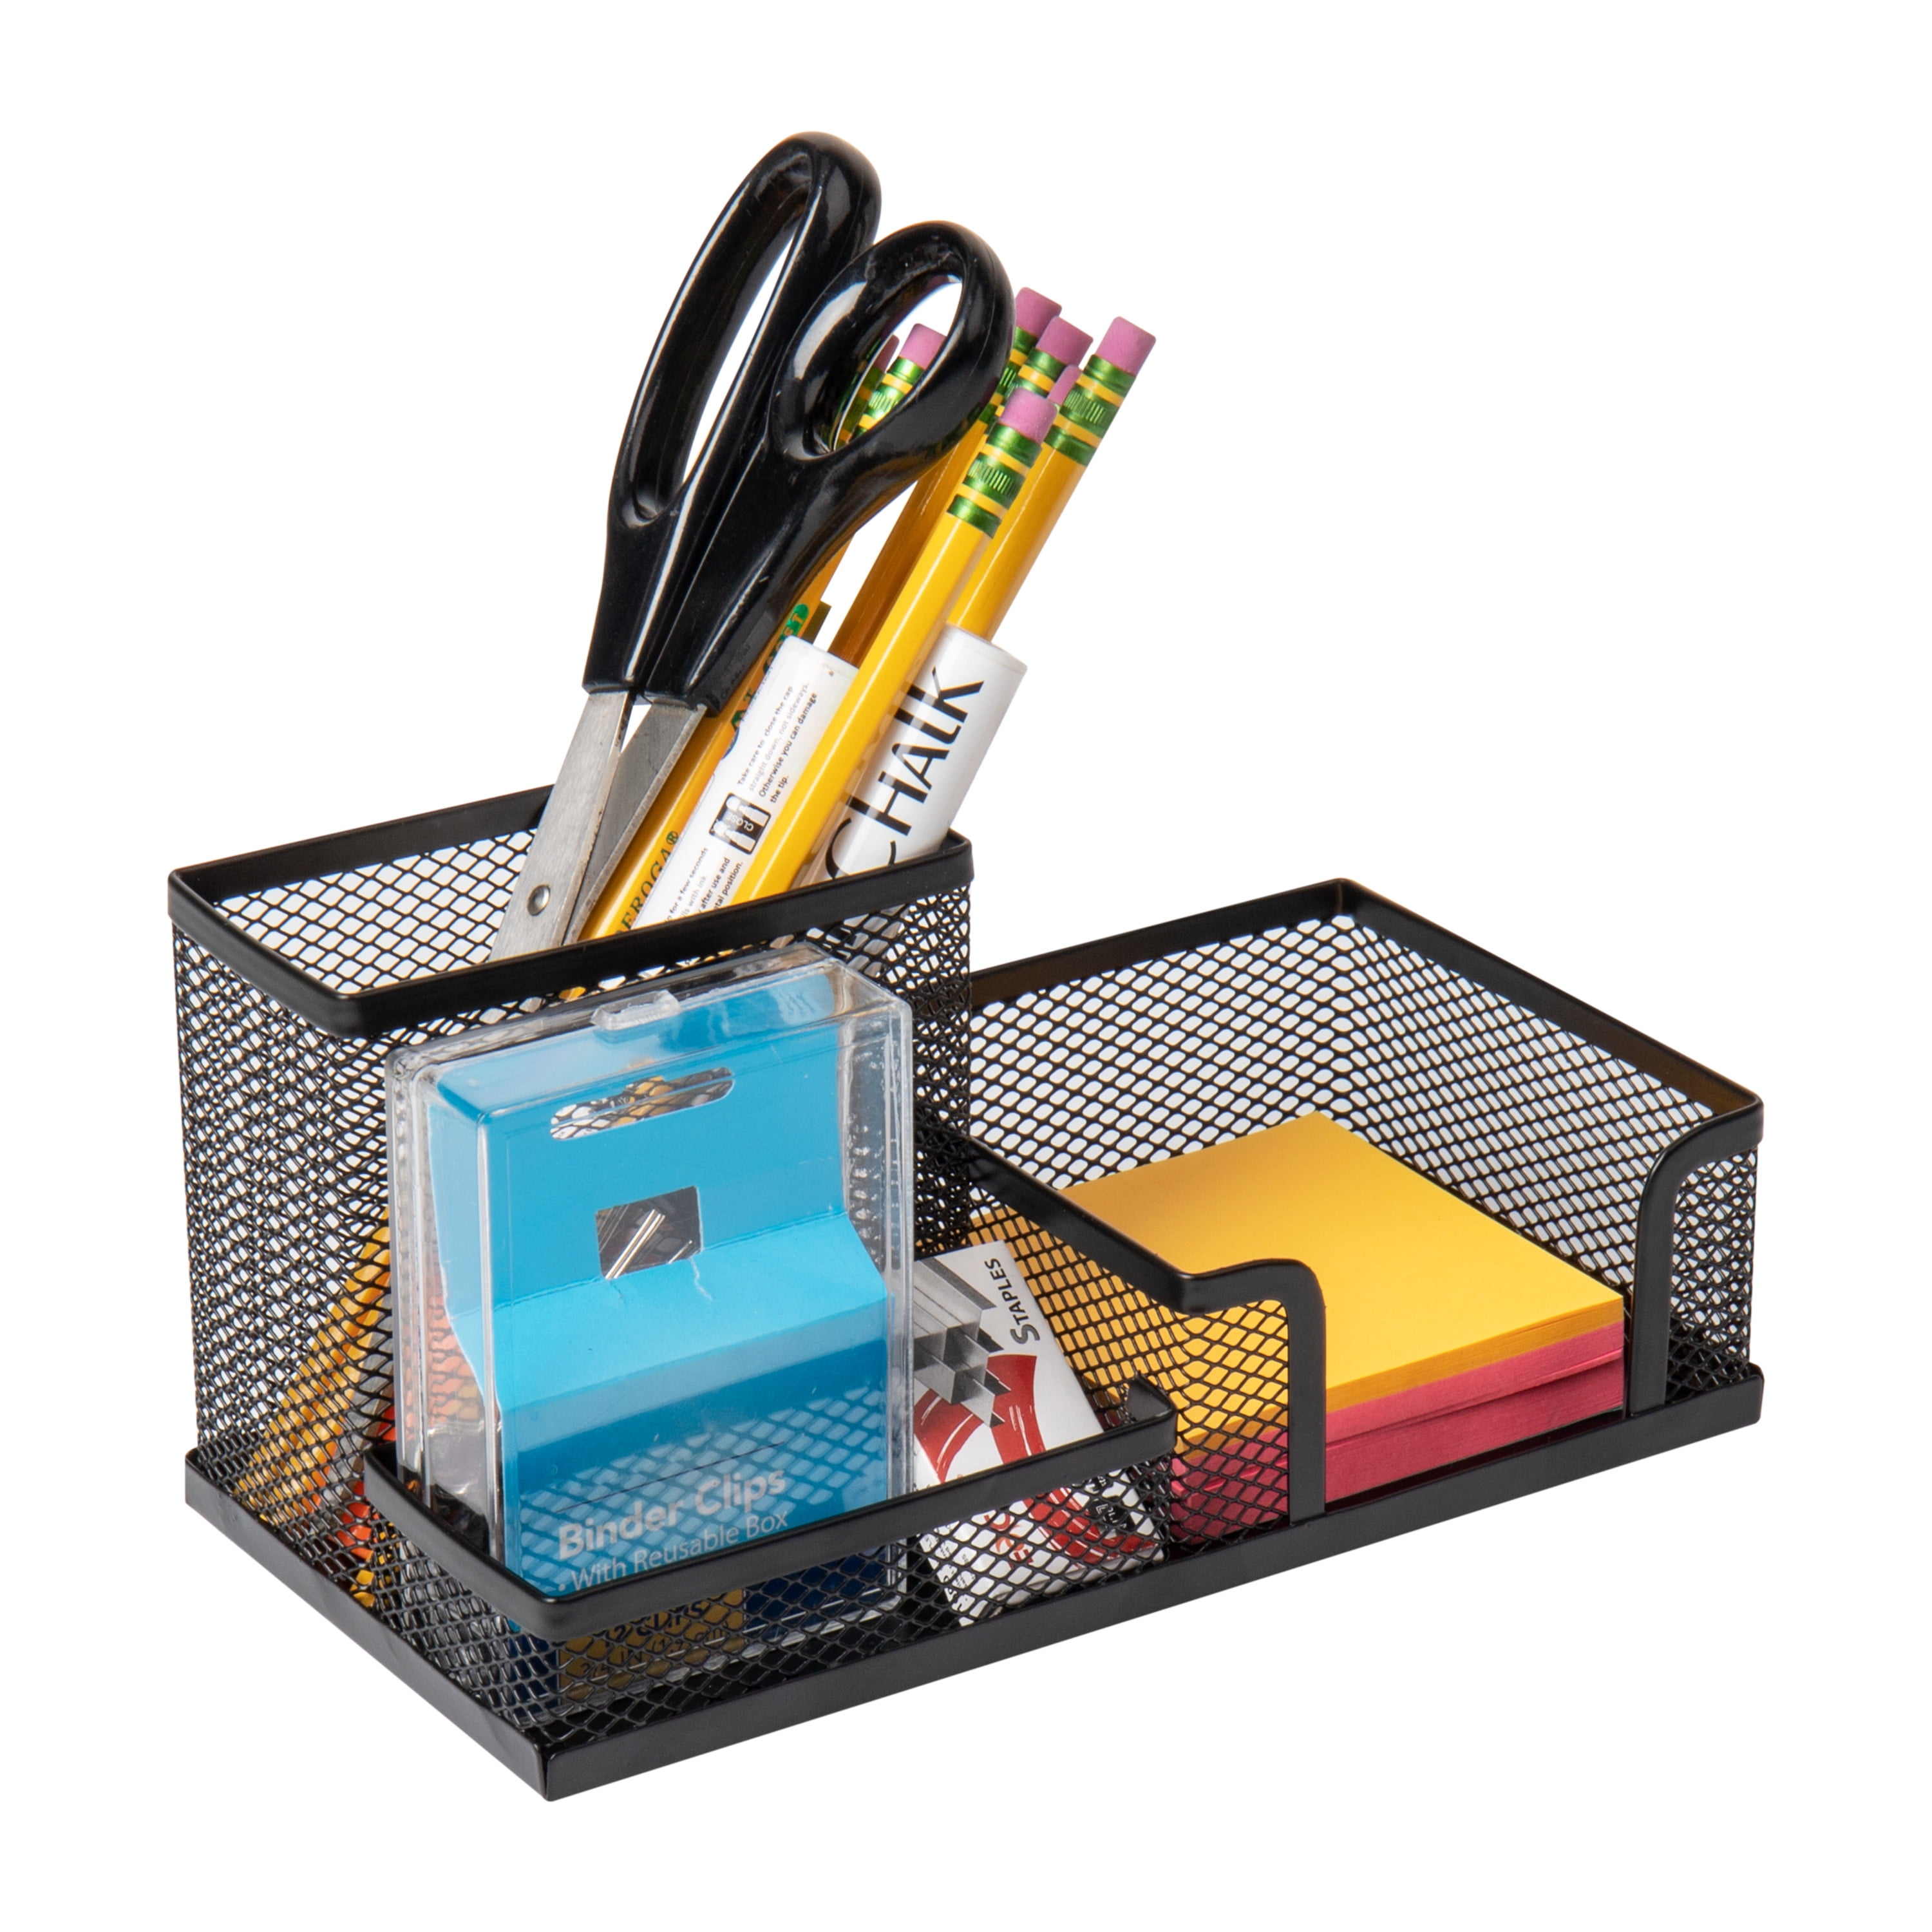 RHCSZ 6 Piece Office Supplies/Desk Organizer Set with Desktop Leather Writing Pad,File Paper Tray,Magazine Folder Holder, Pen Cup,Sticky Note Holder